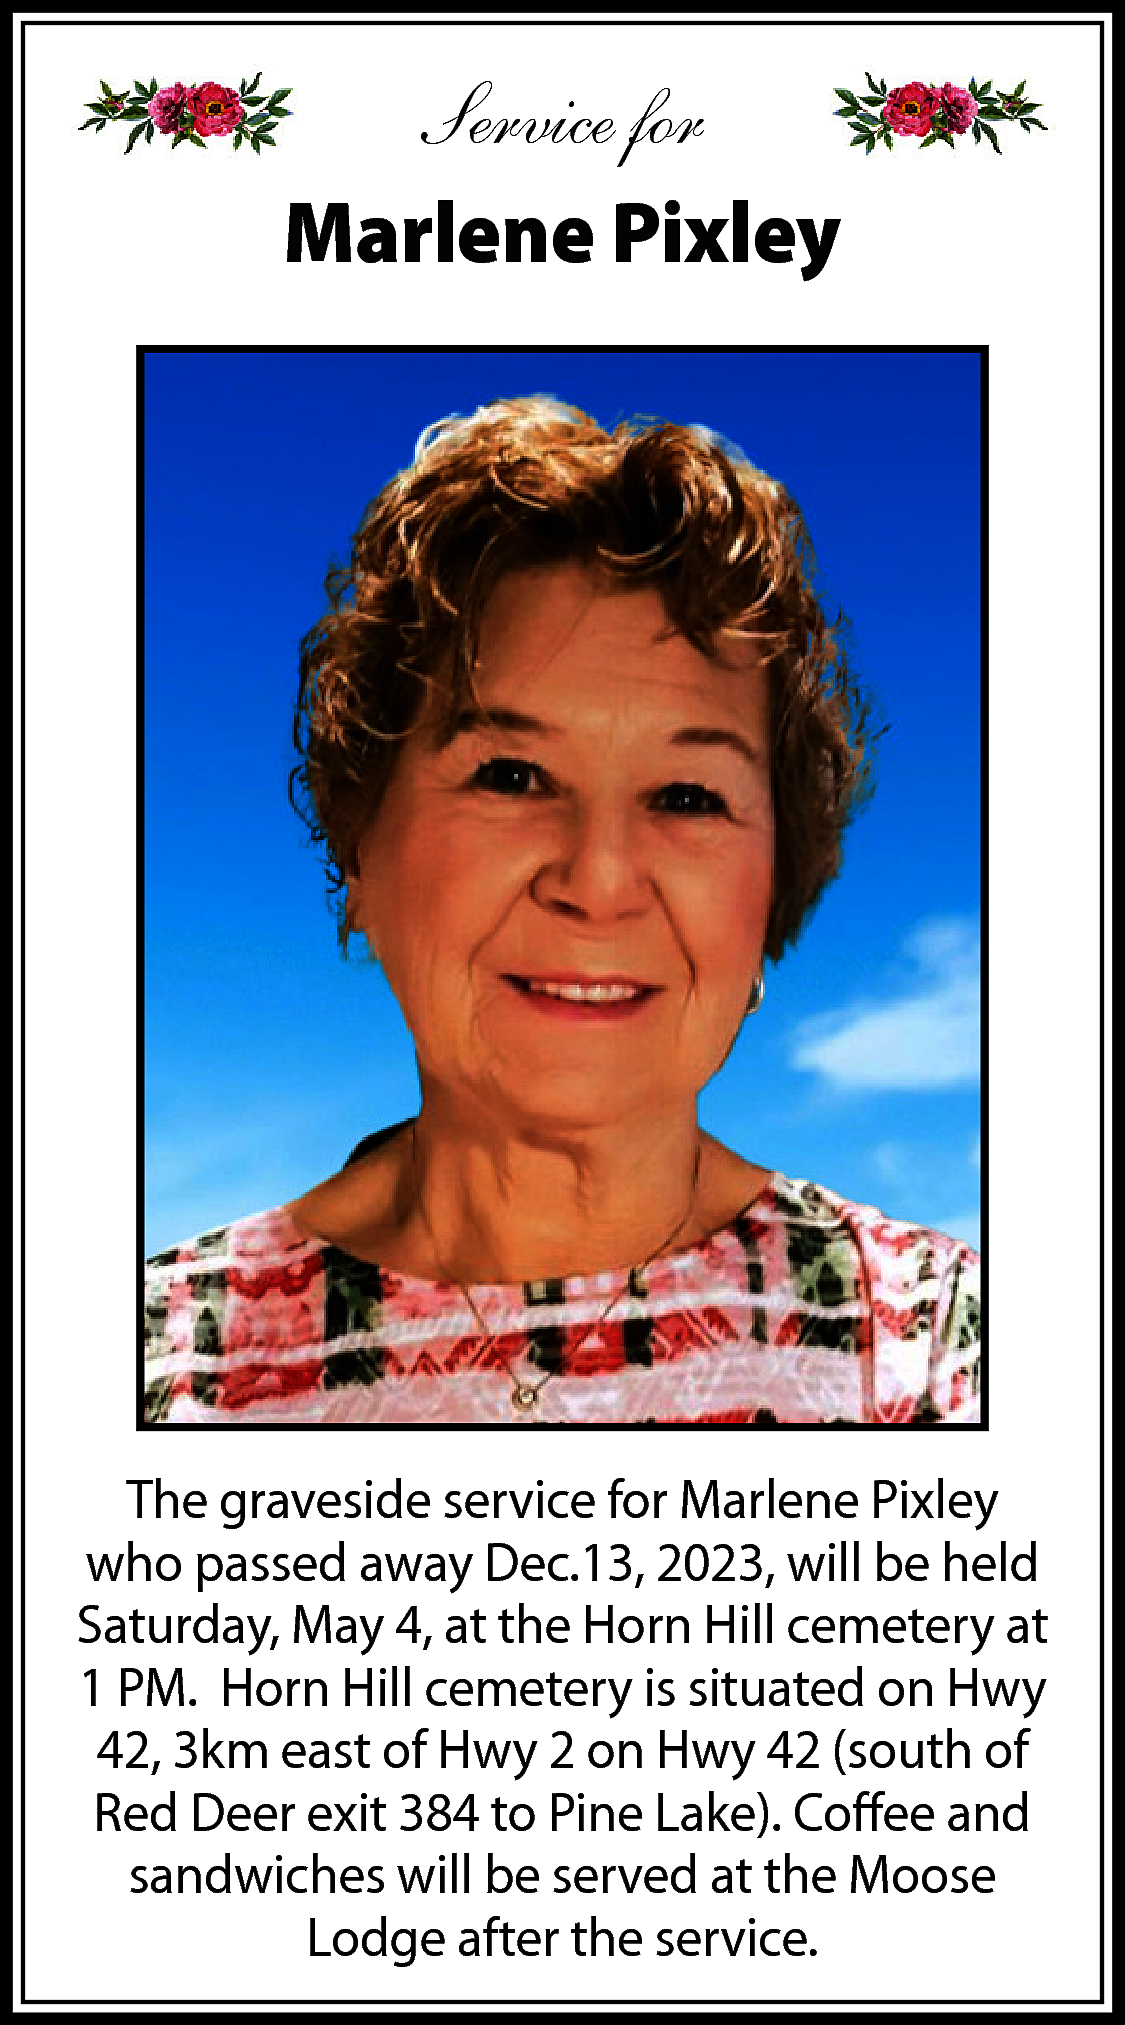 Service for <br>Marlene Pixley <br>  Service for  Marlene Pixley    The graveside service for Marlene Pixley  who passed away Dec.13, 2023, will be held  Saturday, May 4, at the Horn Hill cemetery at  1 PM. Horn Hill cemetery is situated on Hwy  42, 3km east of Hwy 2 on Hwy 42 (south of  Red Deer exit 384 to Pine Lake). Coffee and  sandwiches will be served at the Moose  Lodge after the service.    